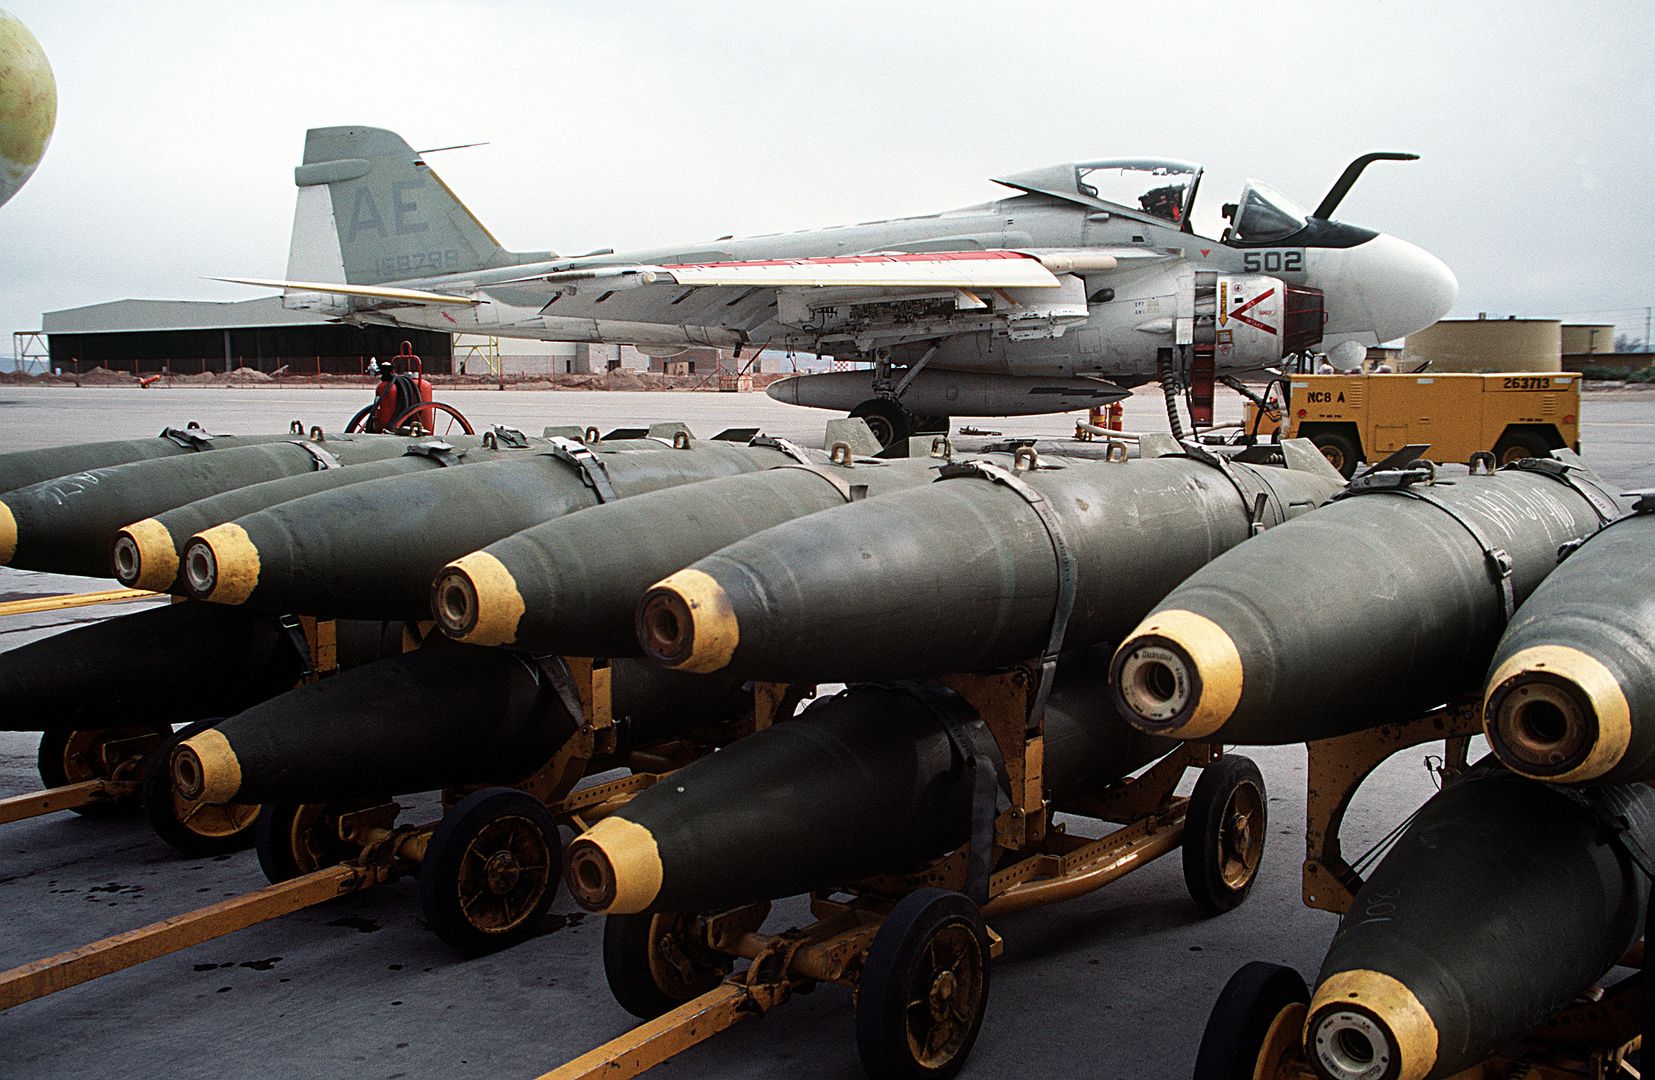 A View Of Bombs On The Flight Line Prior To Loading Operations With A 6E Intruder Aircraft From Carrier Air Wing Six